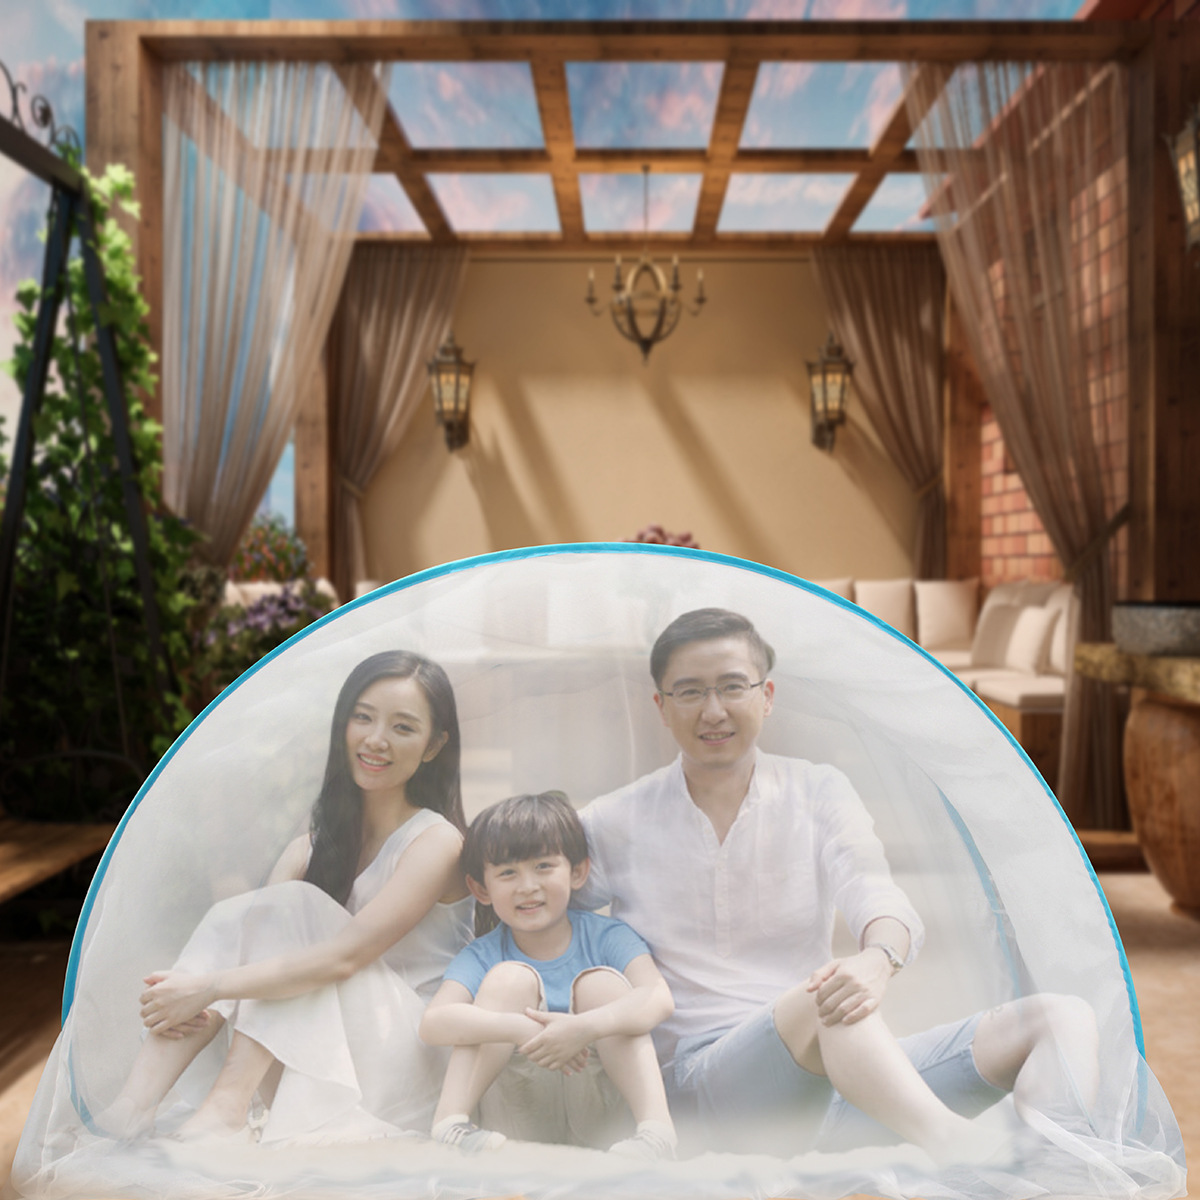 Space Capsule Double Travel Business Trip Bottomless Zipper-Free Encrypted Mesh Portable and Adjustable Size Installed Mosquito Nets